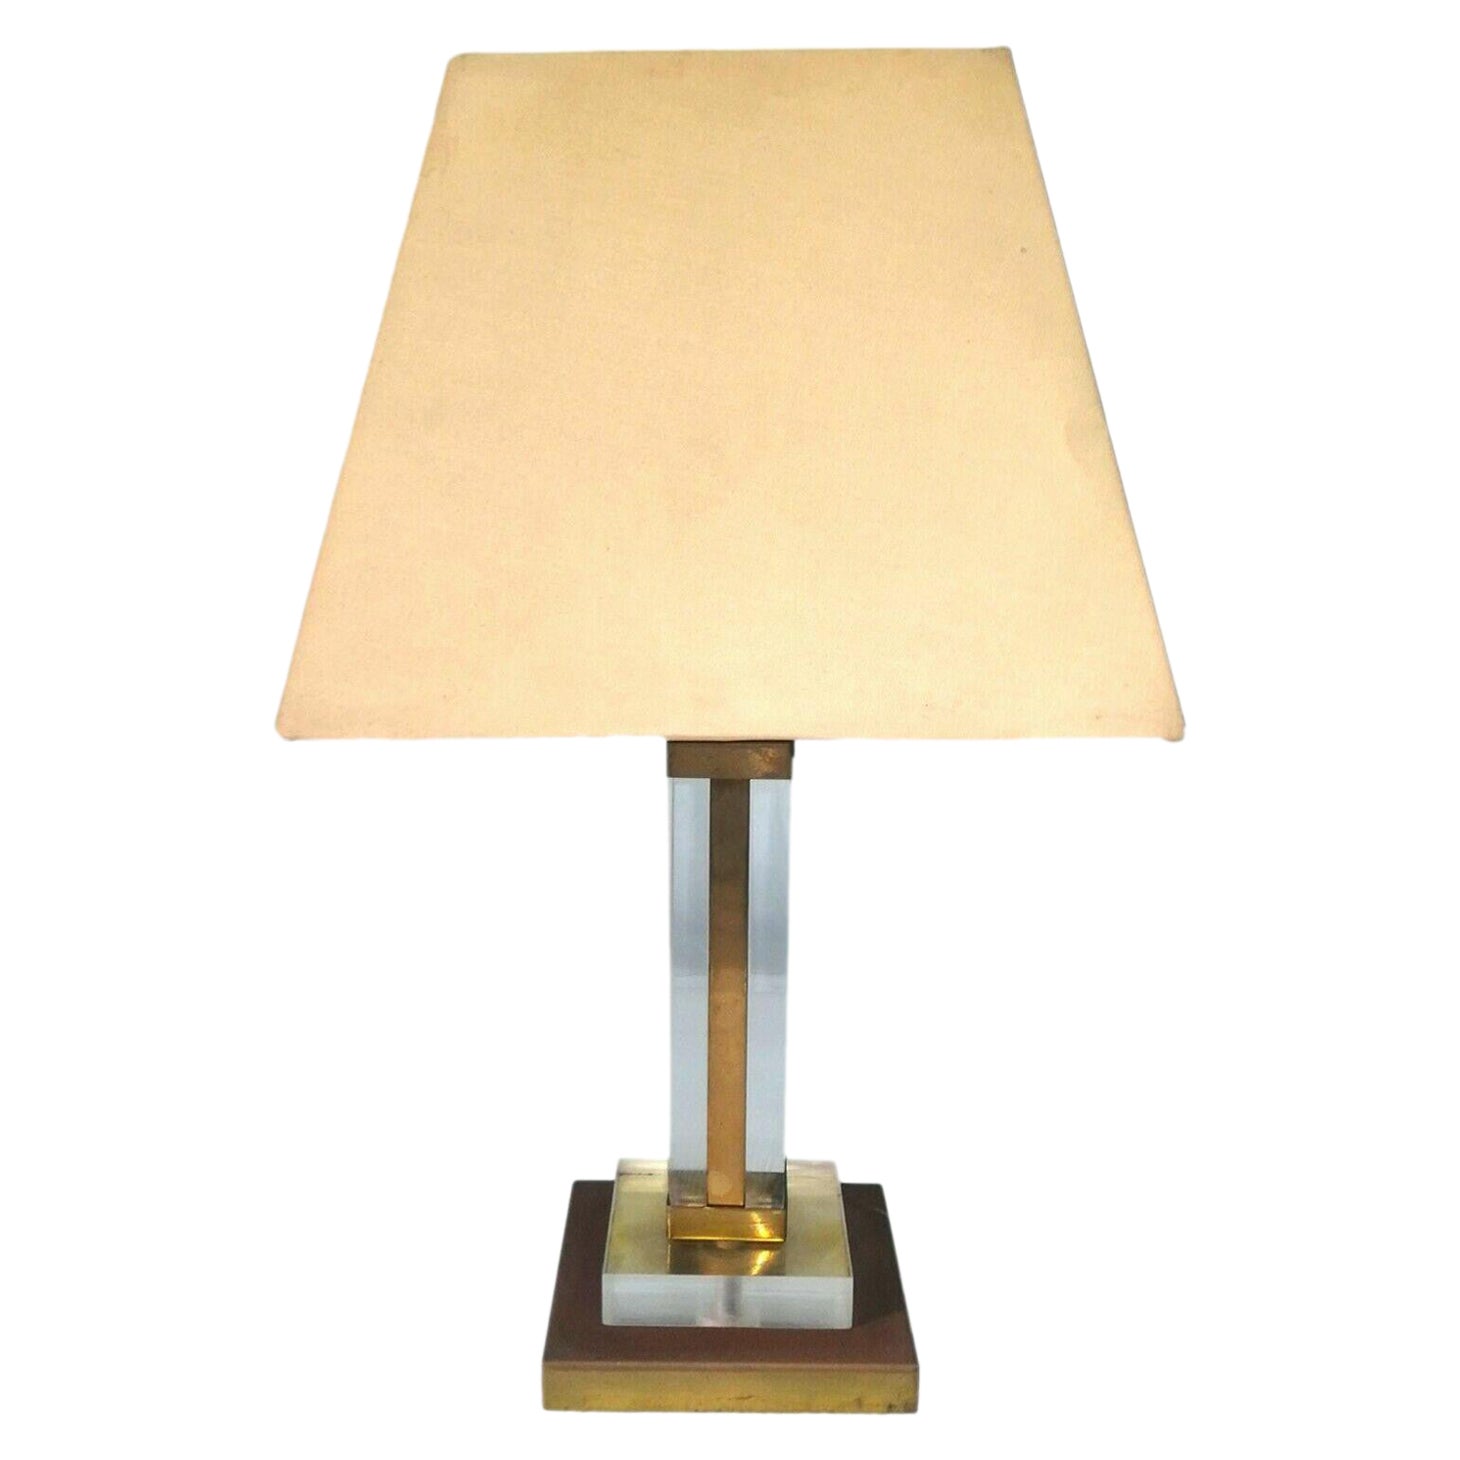 Table Lamp in Lucite "Samantha" Manufacture Corinne Halna, 1970s For Sale